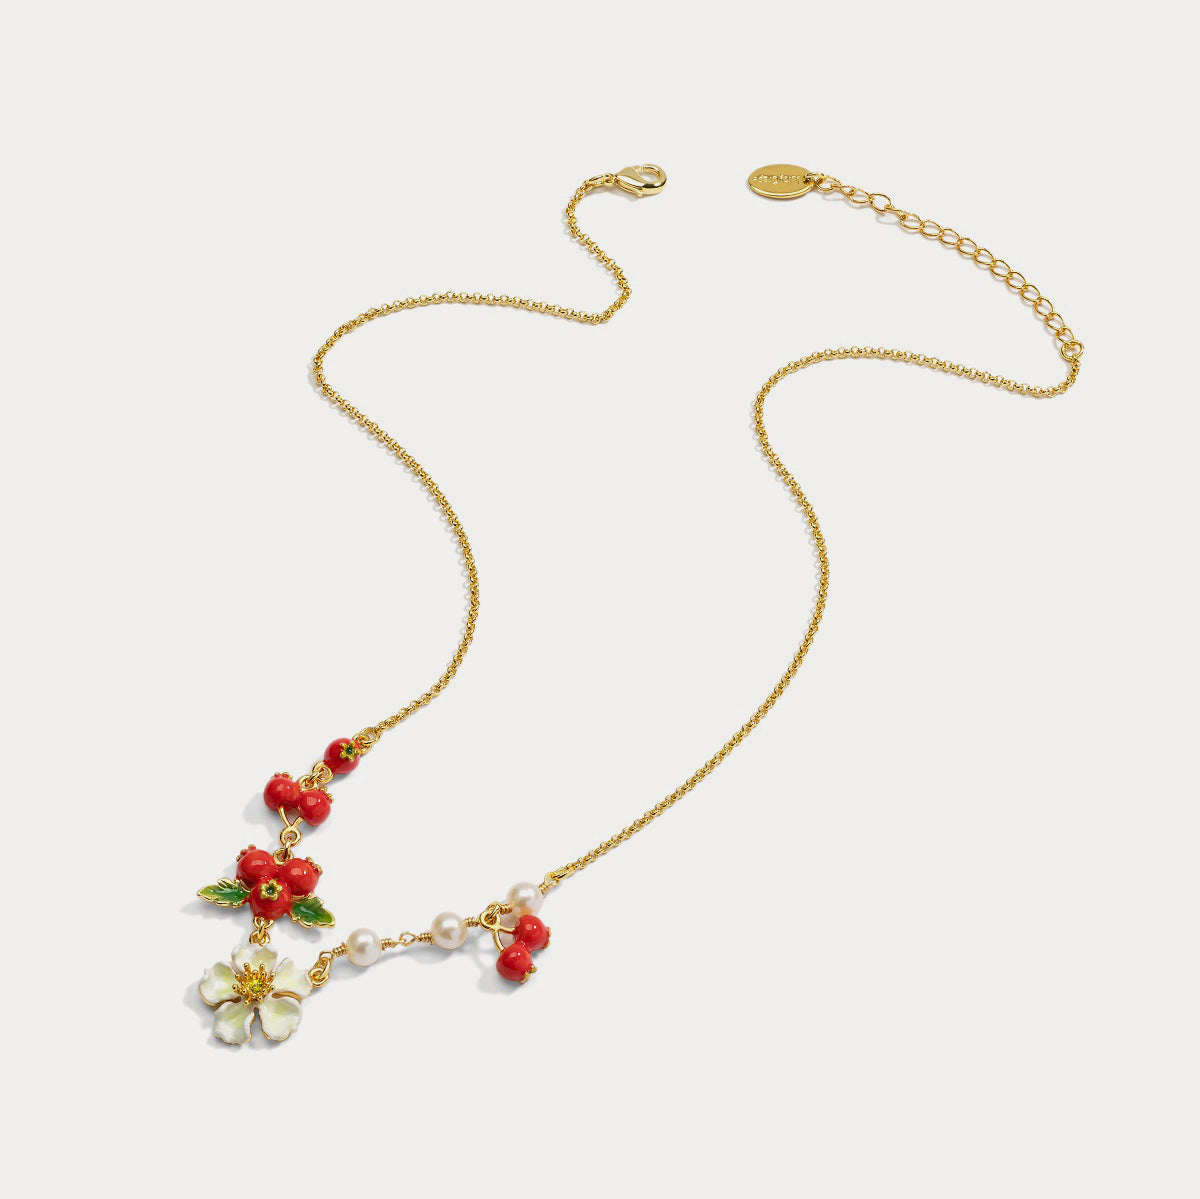 Cranberry Flowers Chain Necklace